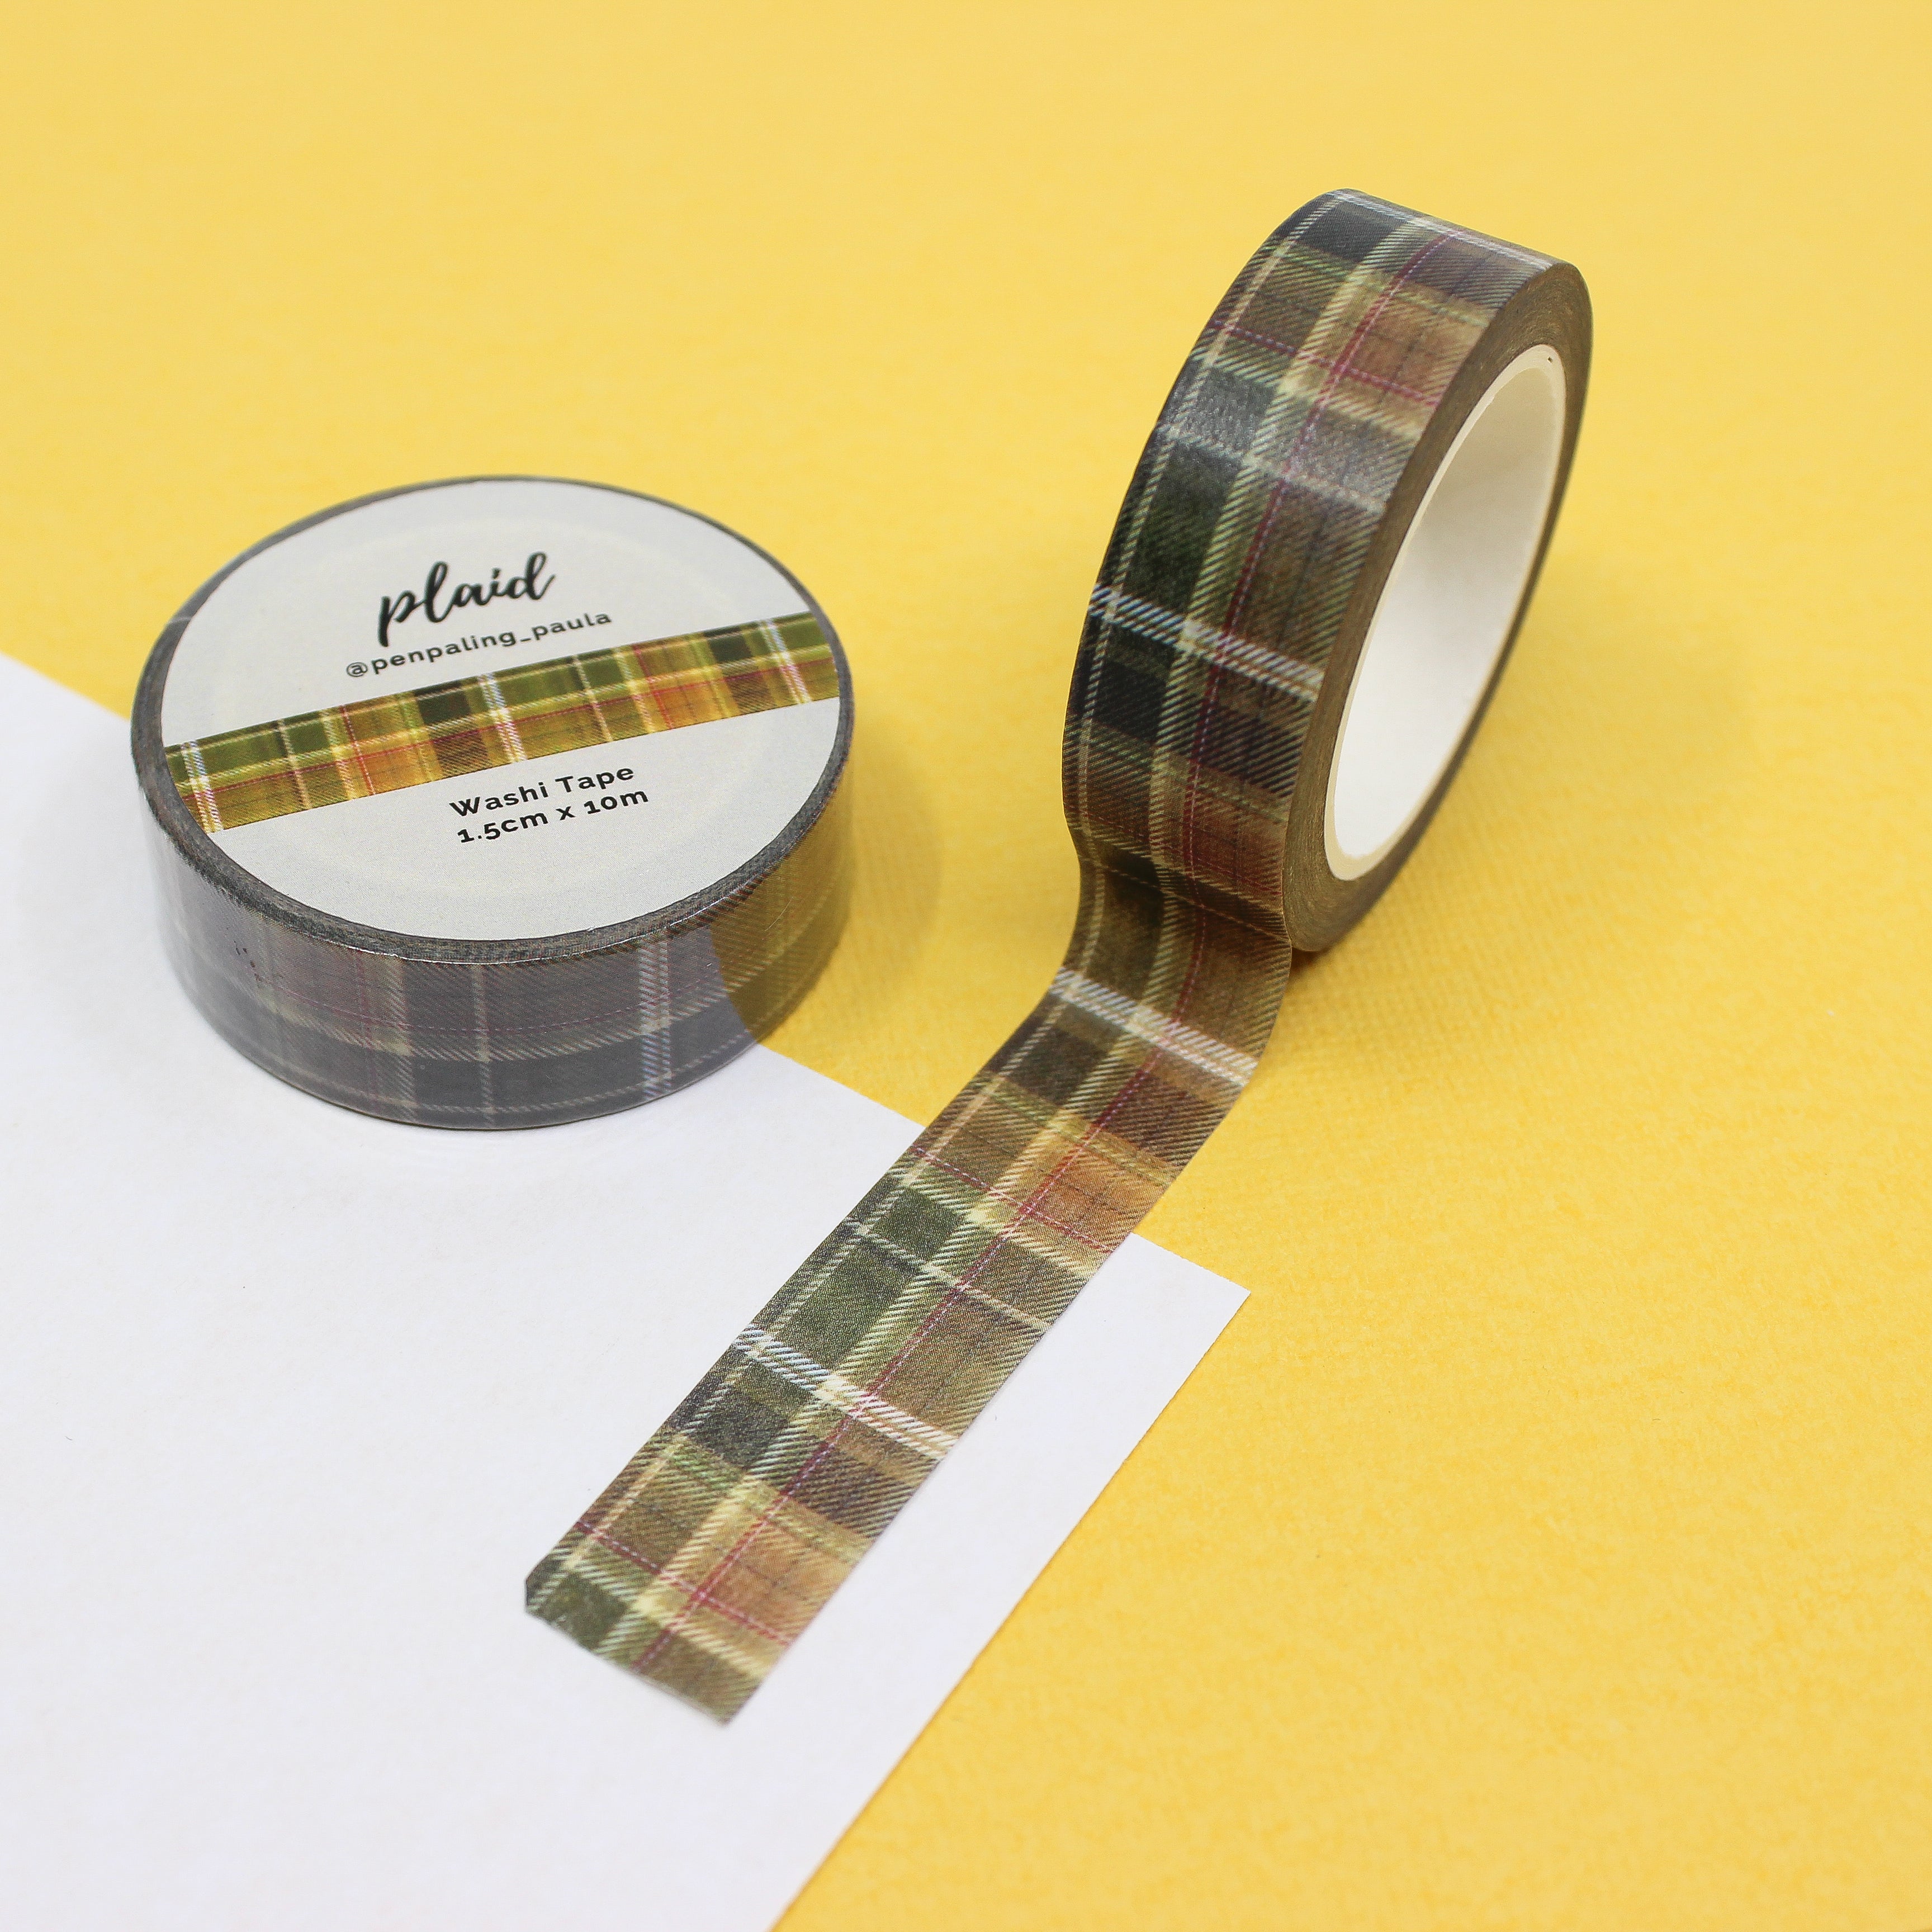   This is a yellow vintage plaid themed washi tape from BBB Supplies Craft Shop